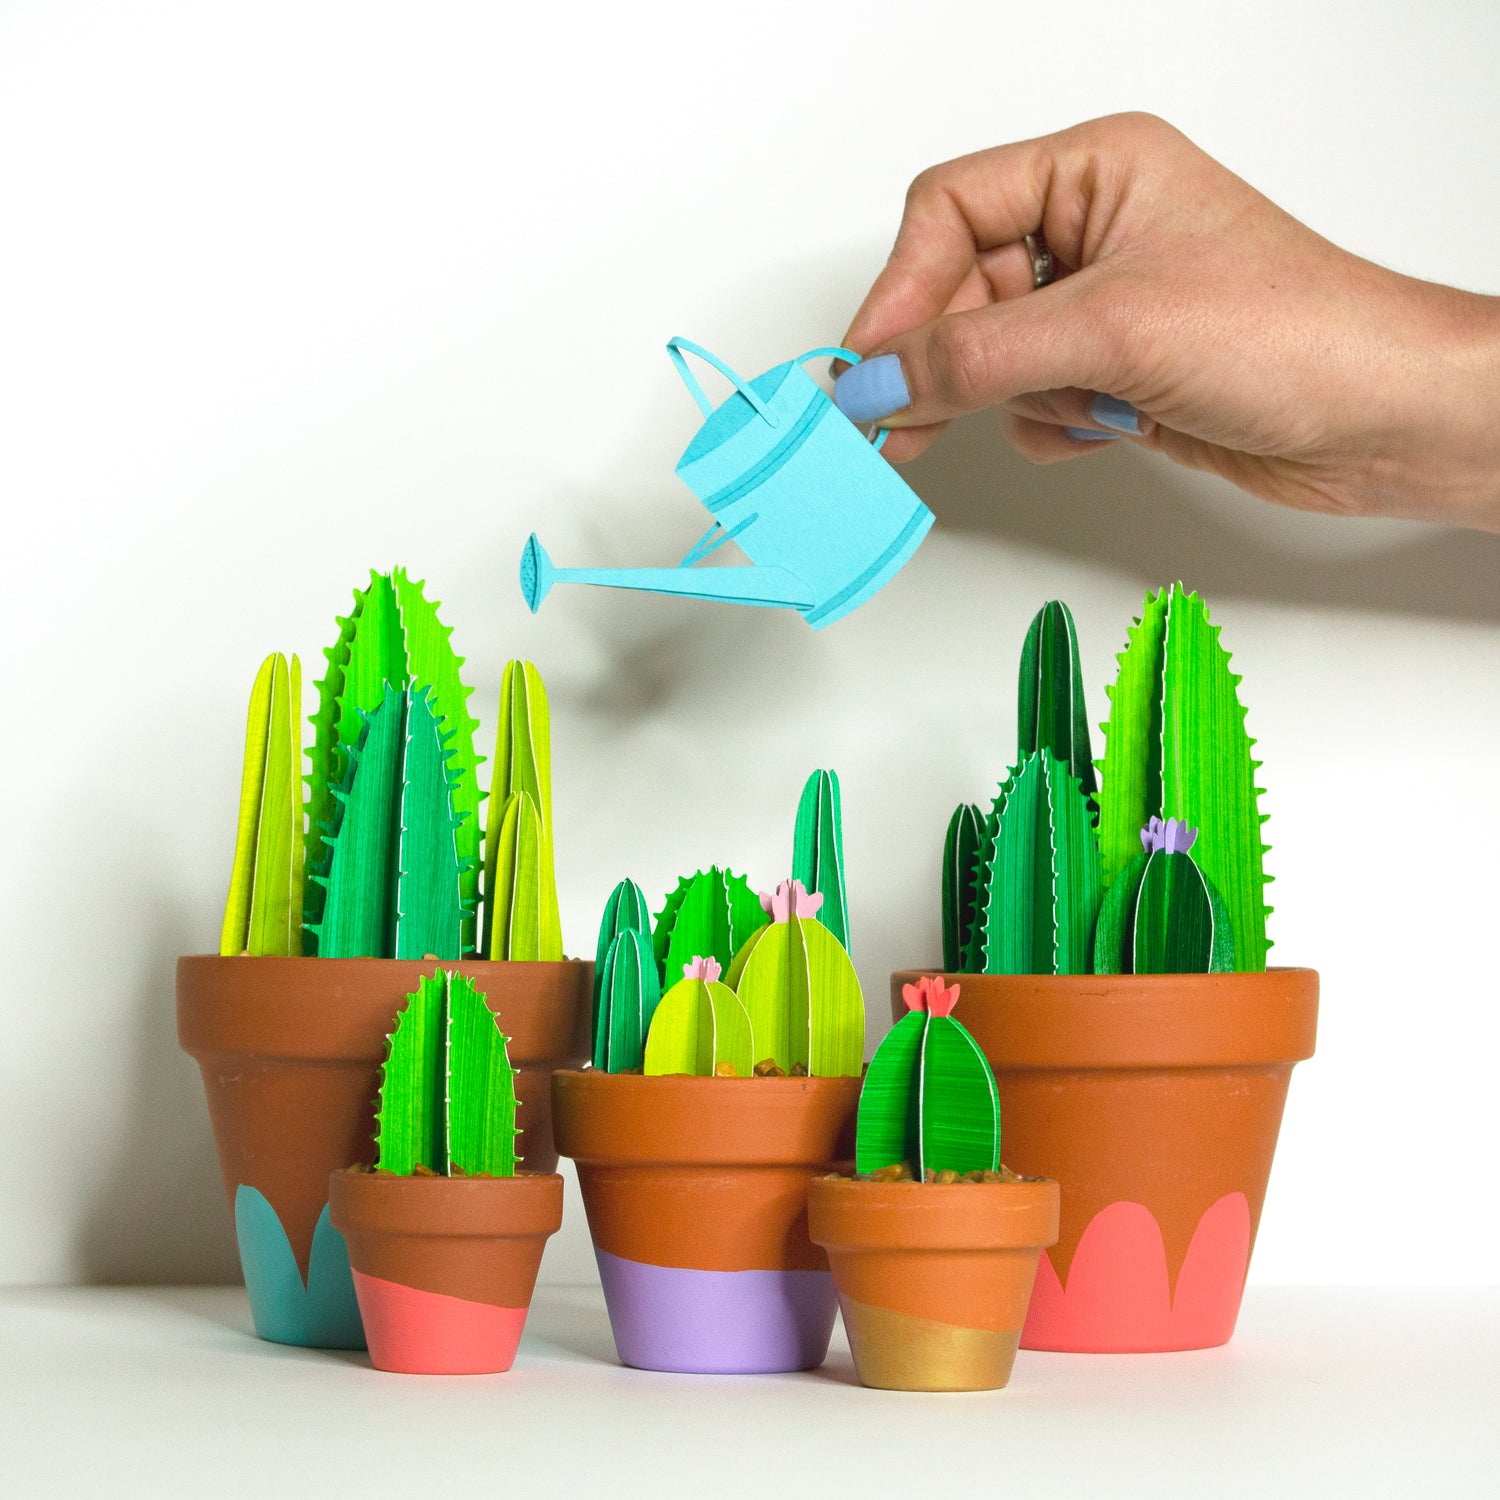 Paper Crafted Plants